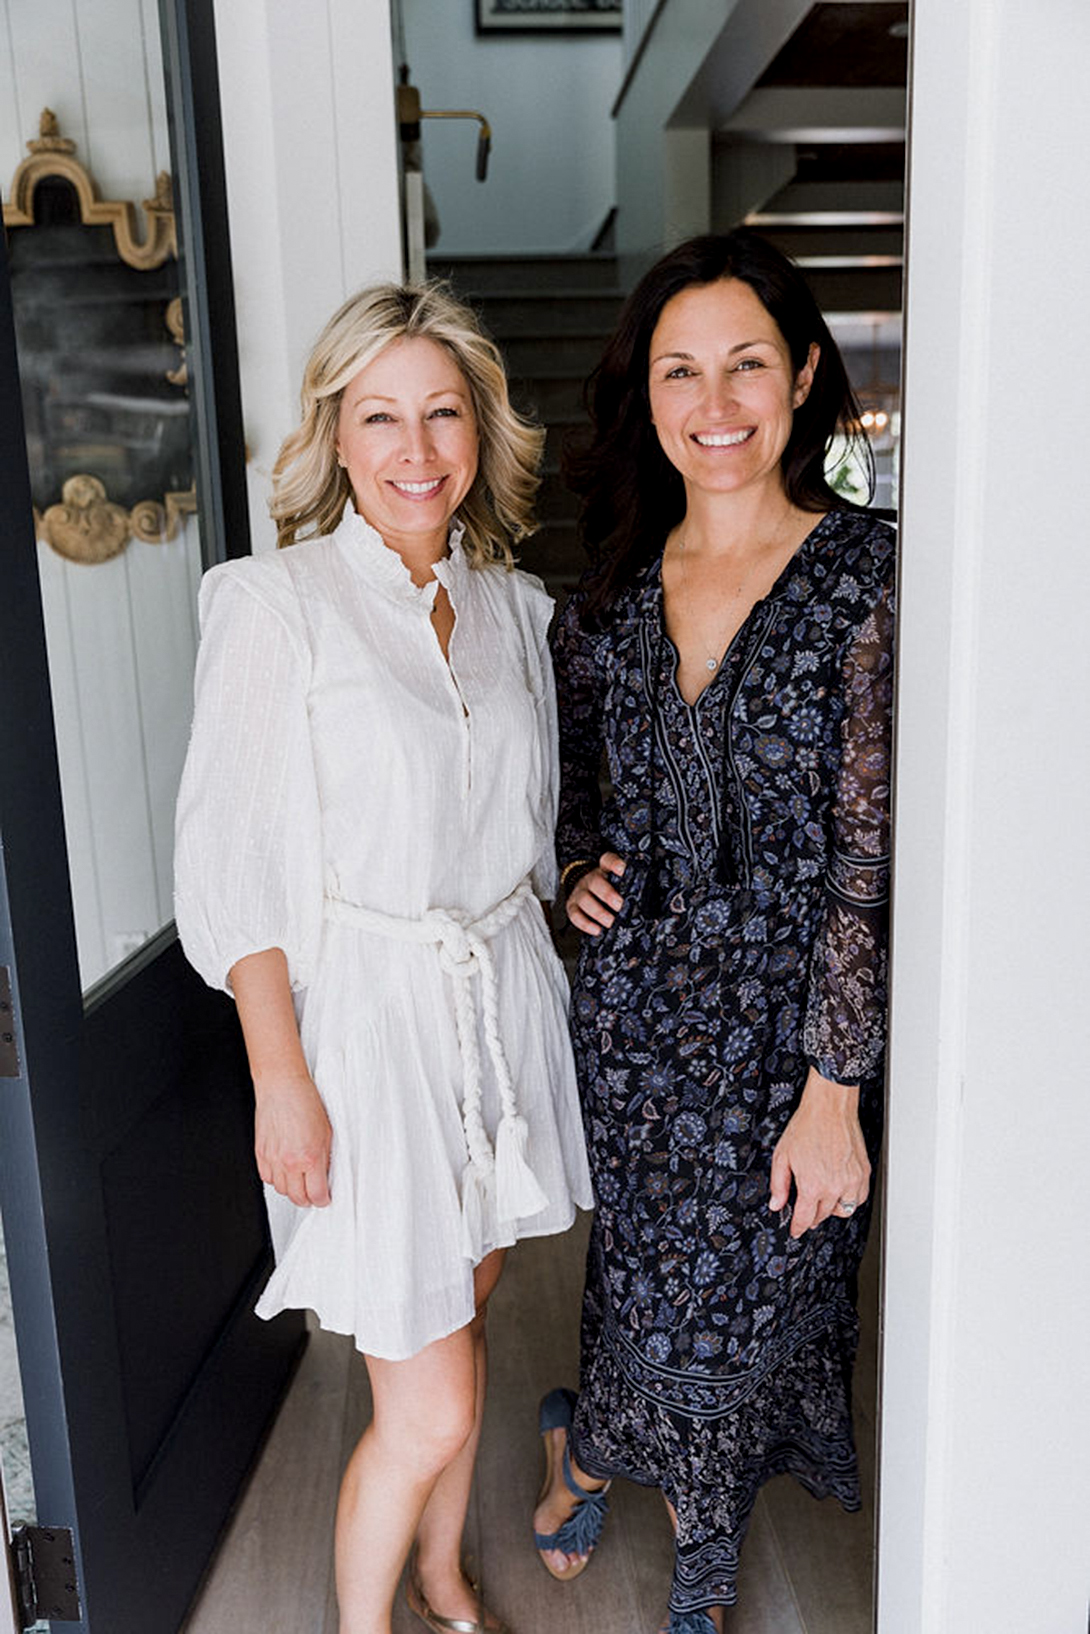 Stephanie Thill and Jennifer Tidwell of the Workroom Mill Valley